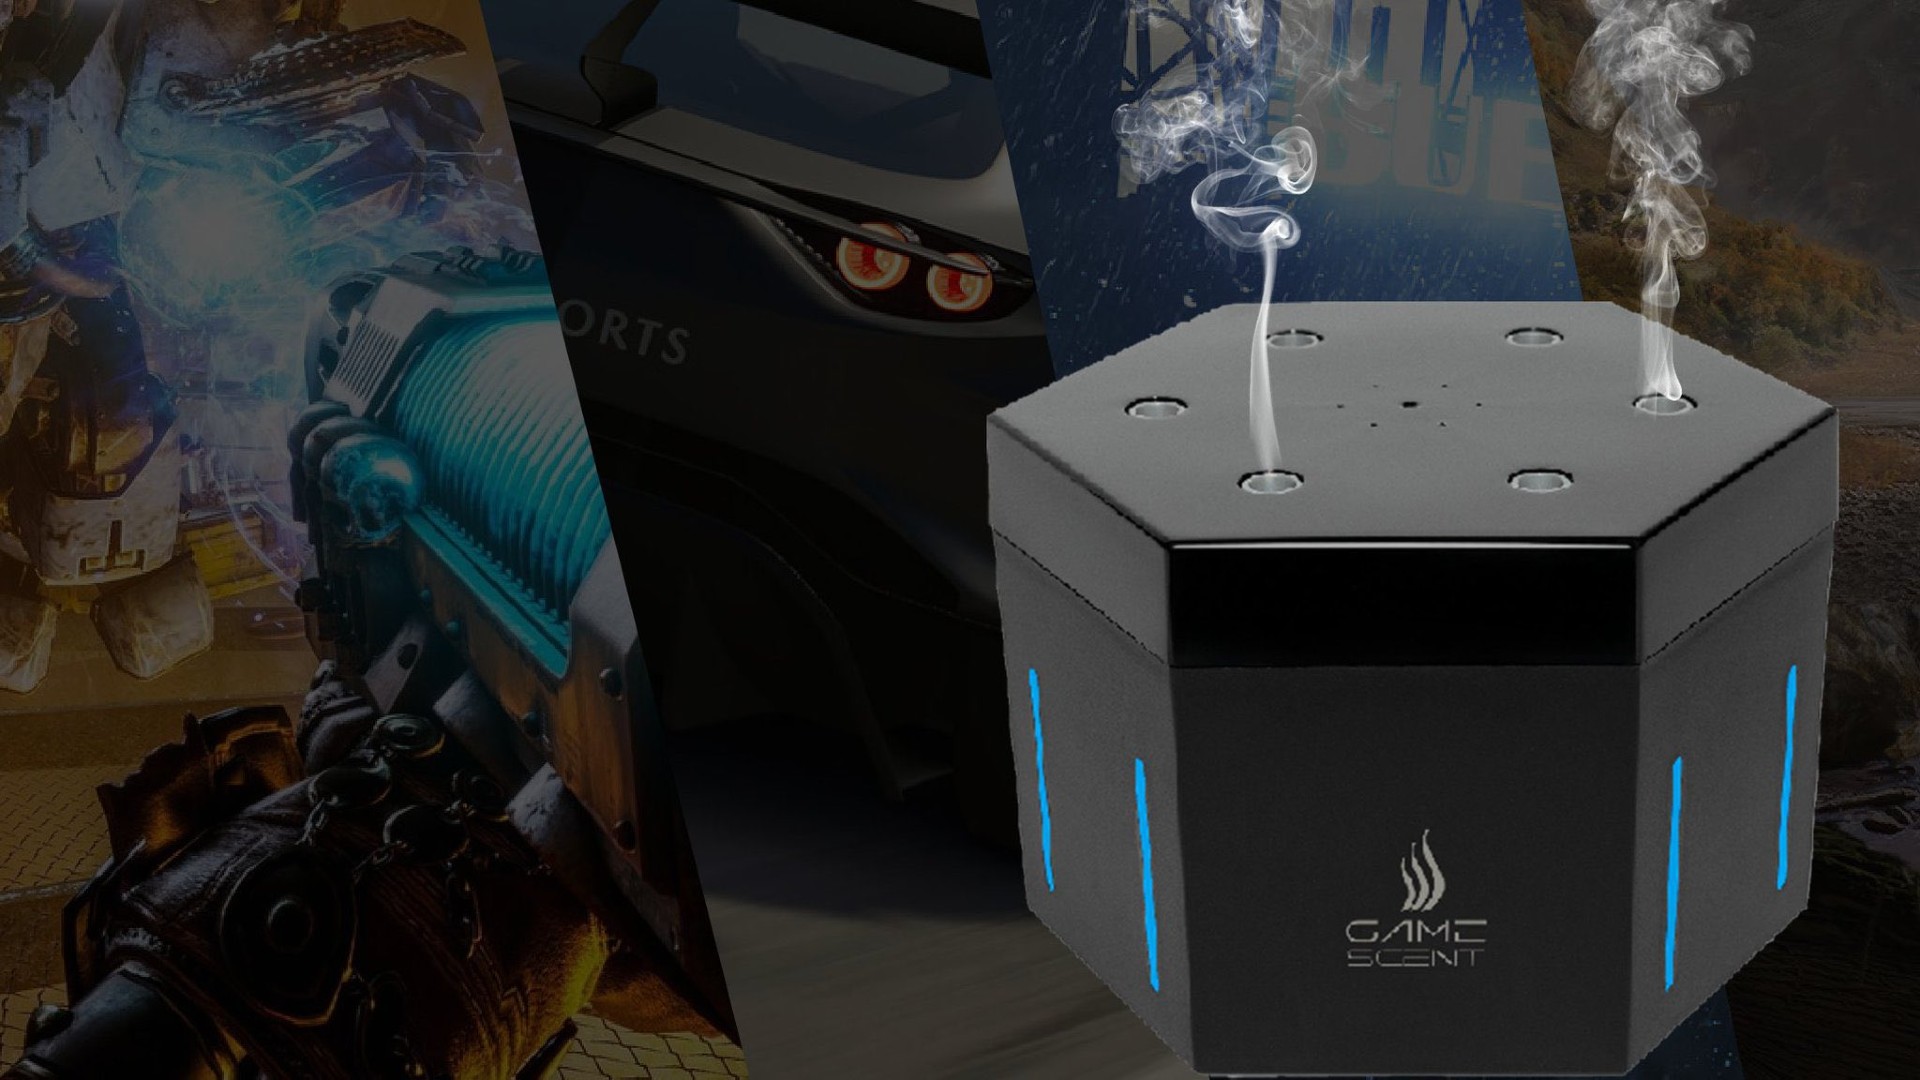 “The biggest revolution in gaming in decades” is a $180 AI-powered fart box that makes your room smell of blood, gunfire, explosions, and – seriously – “clean air”